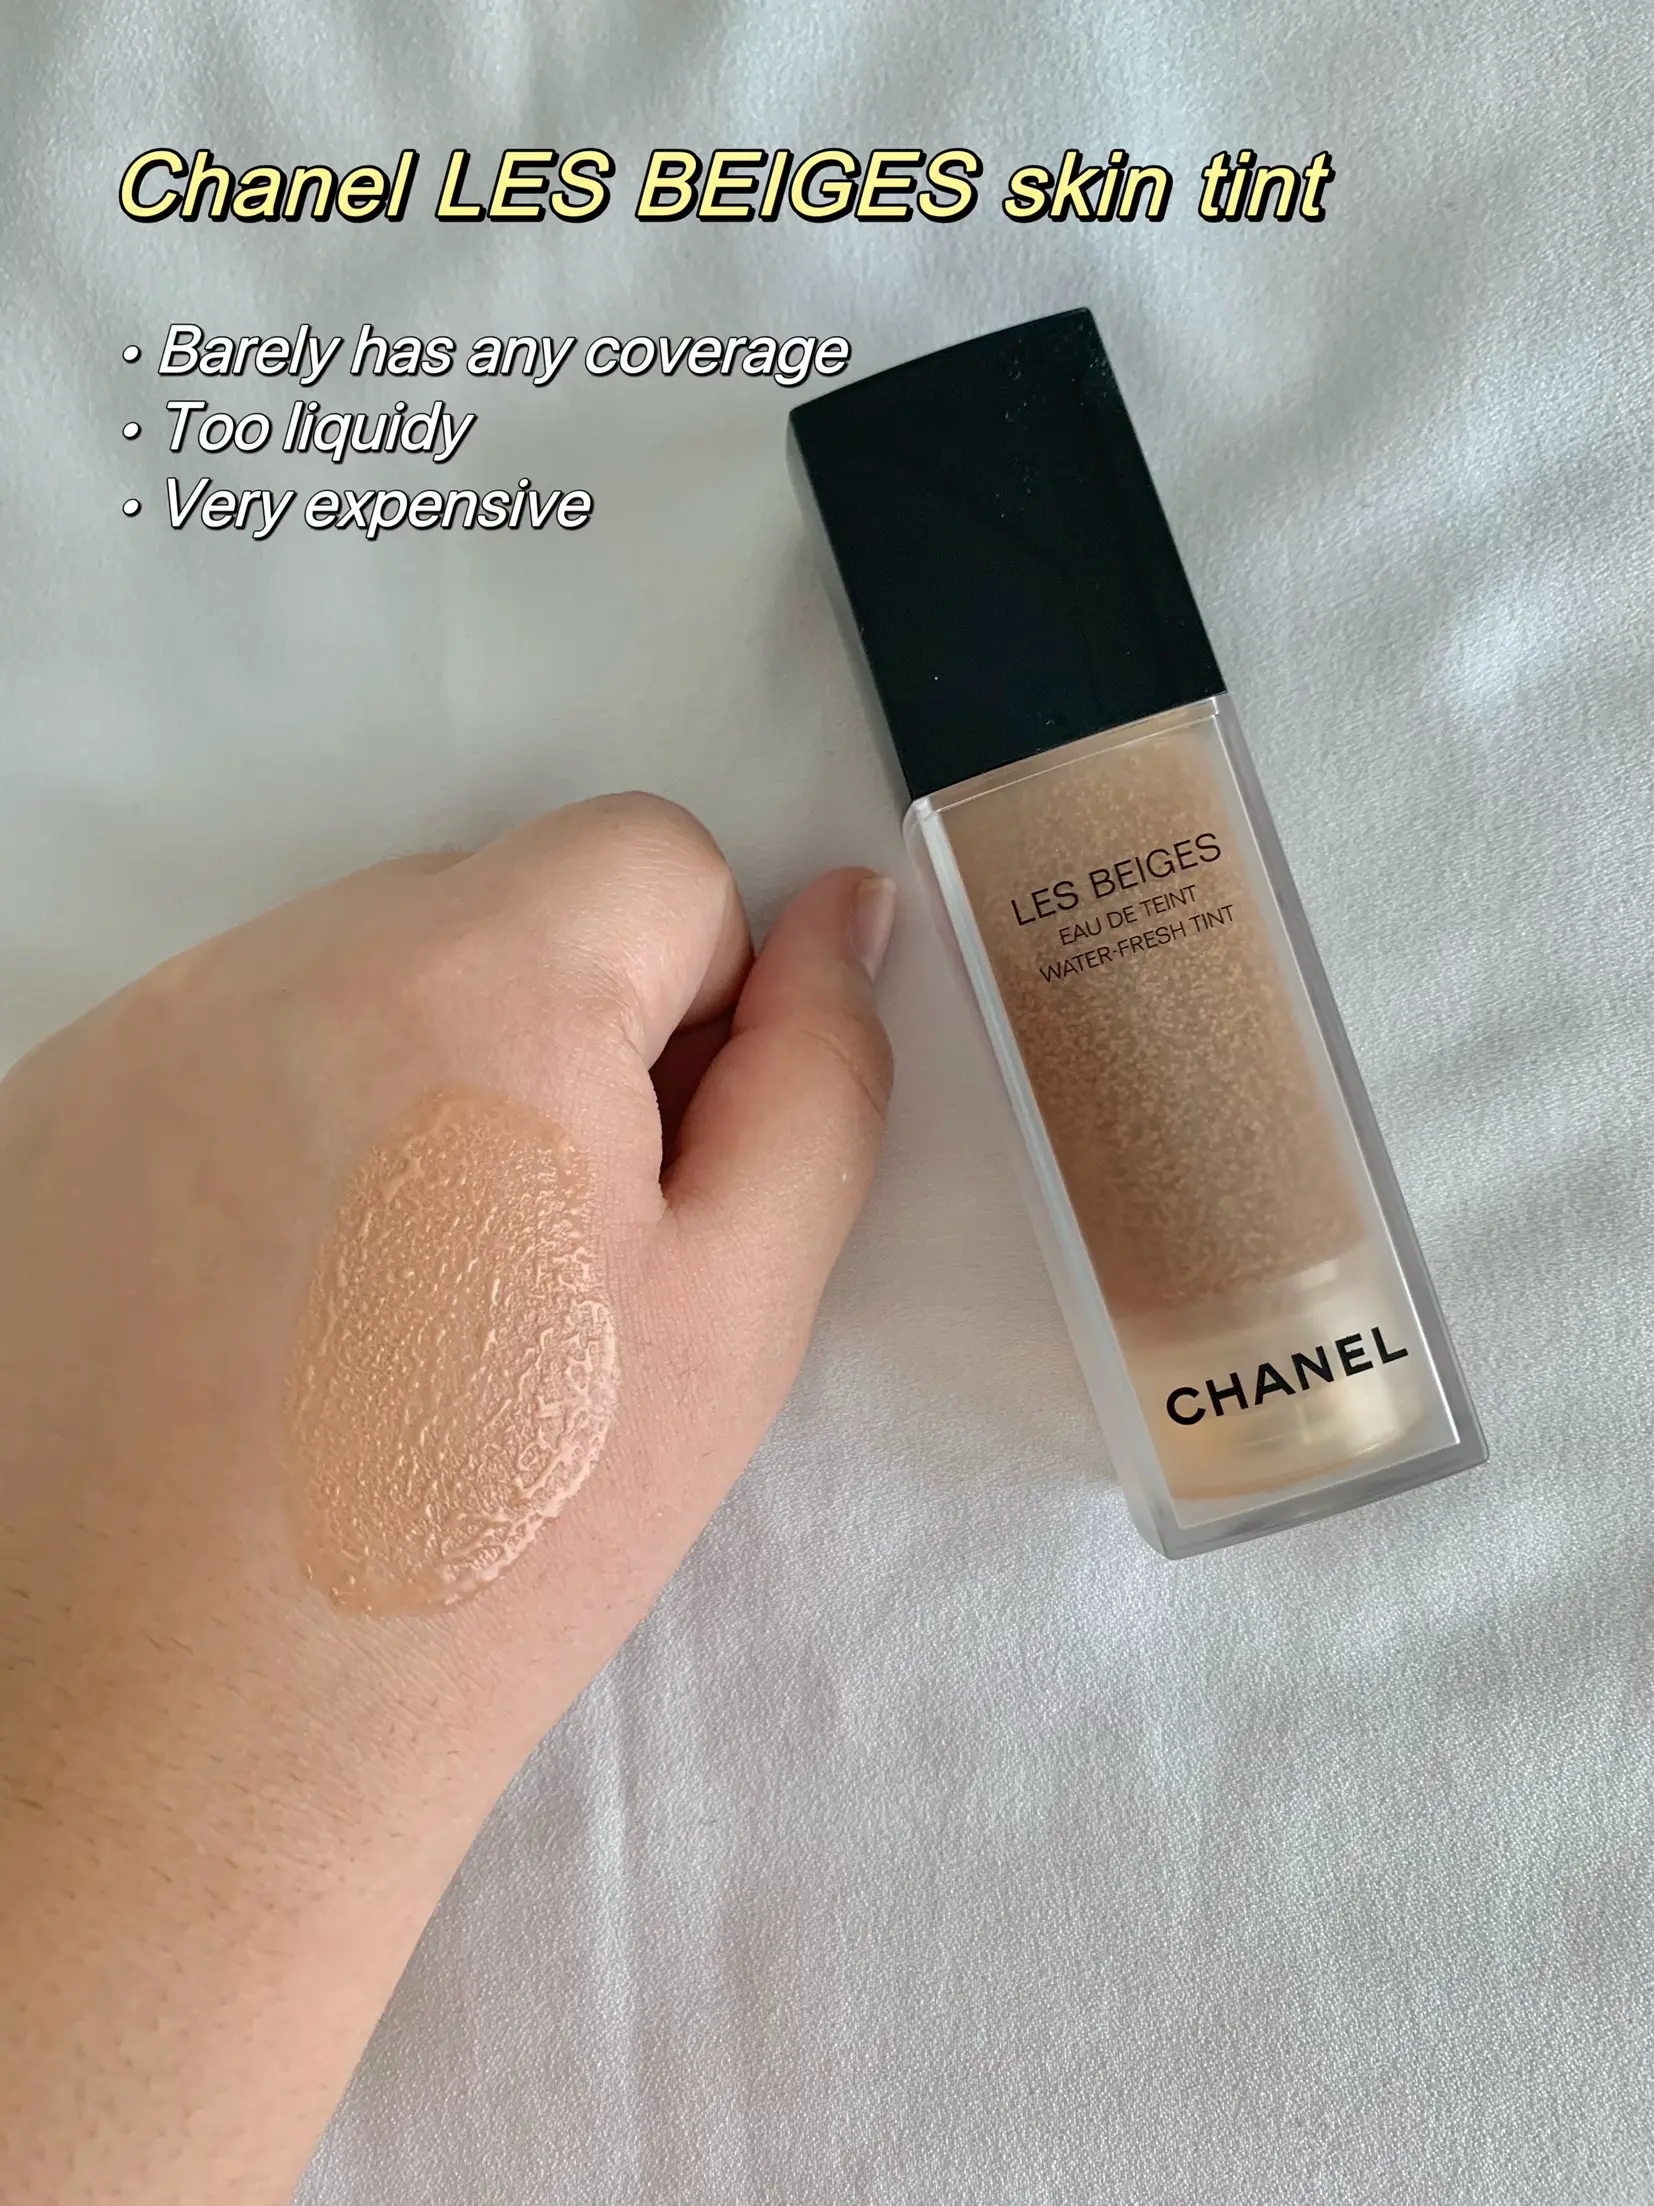 The truth about the Chanel LES BEIGES skin tint